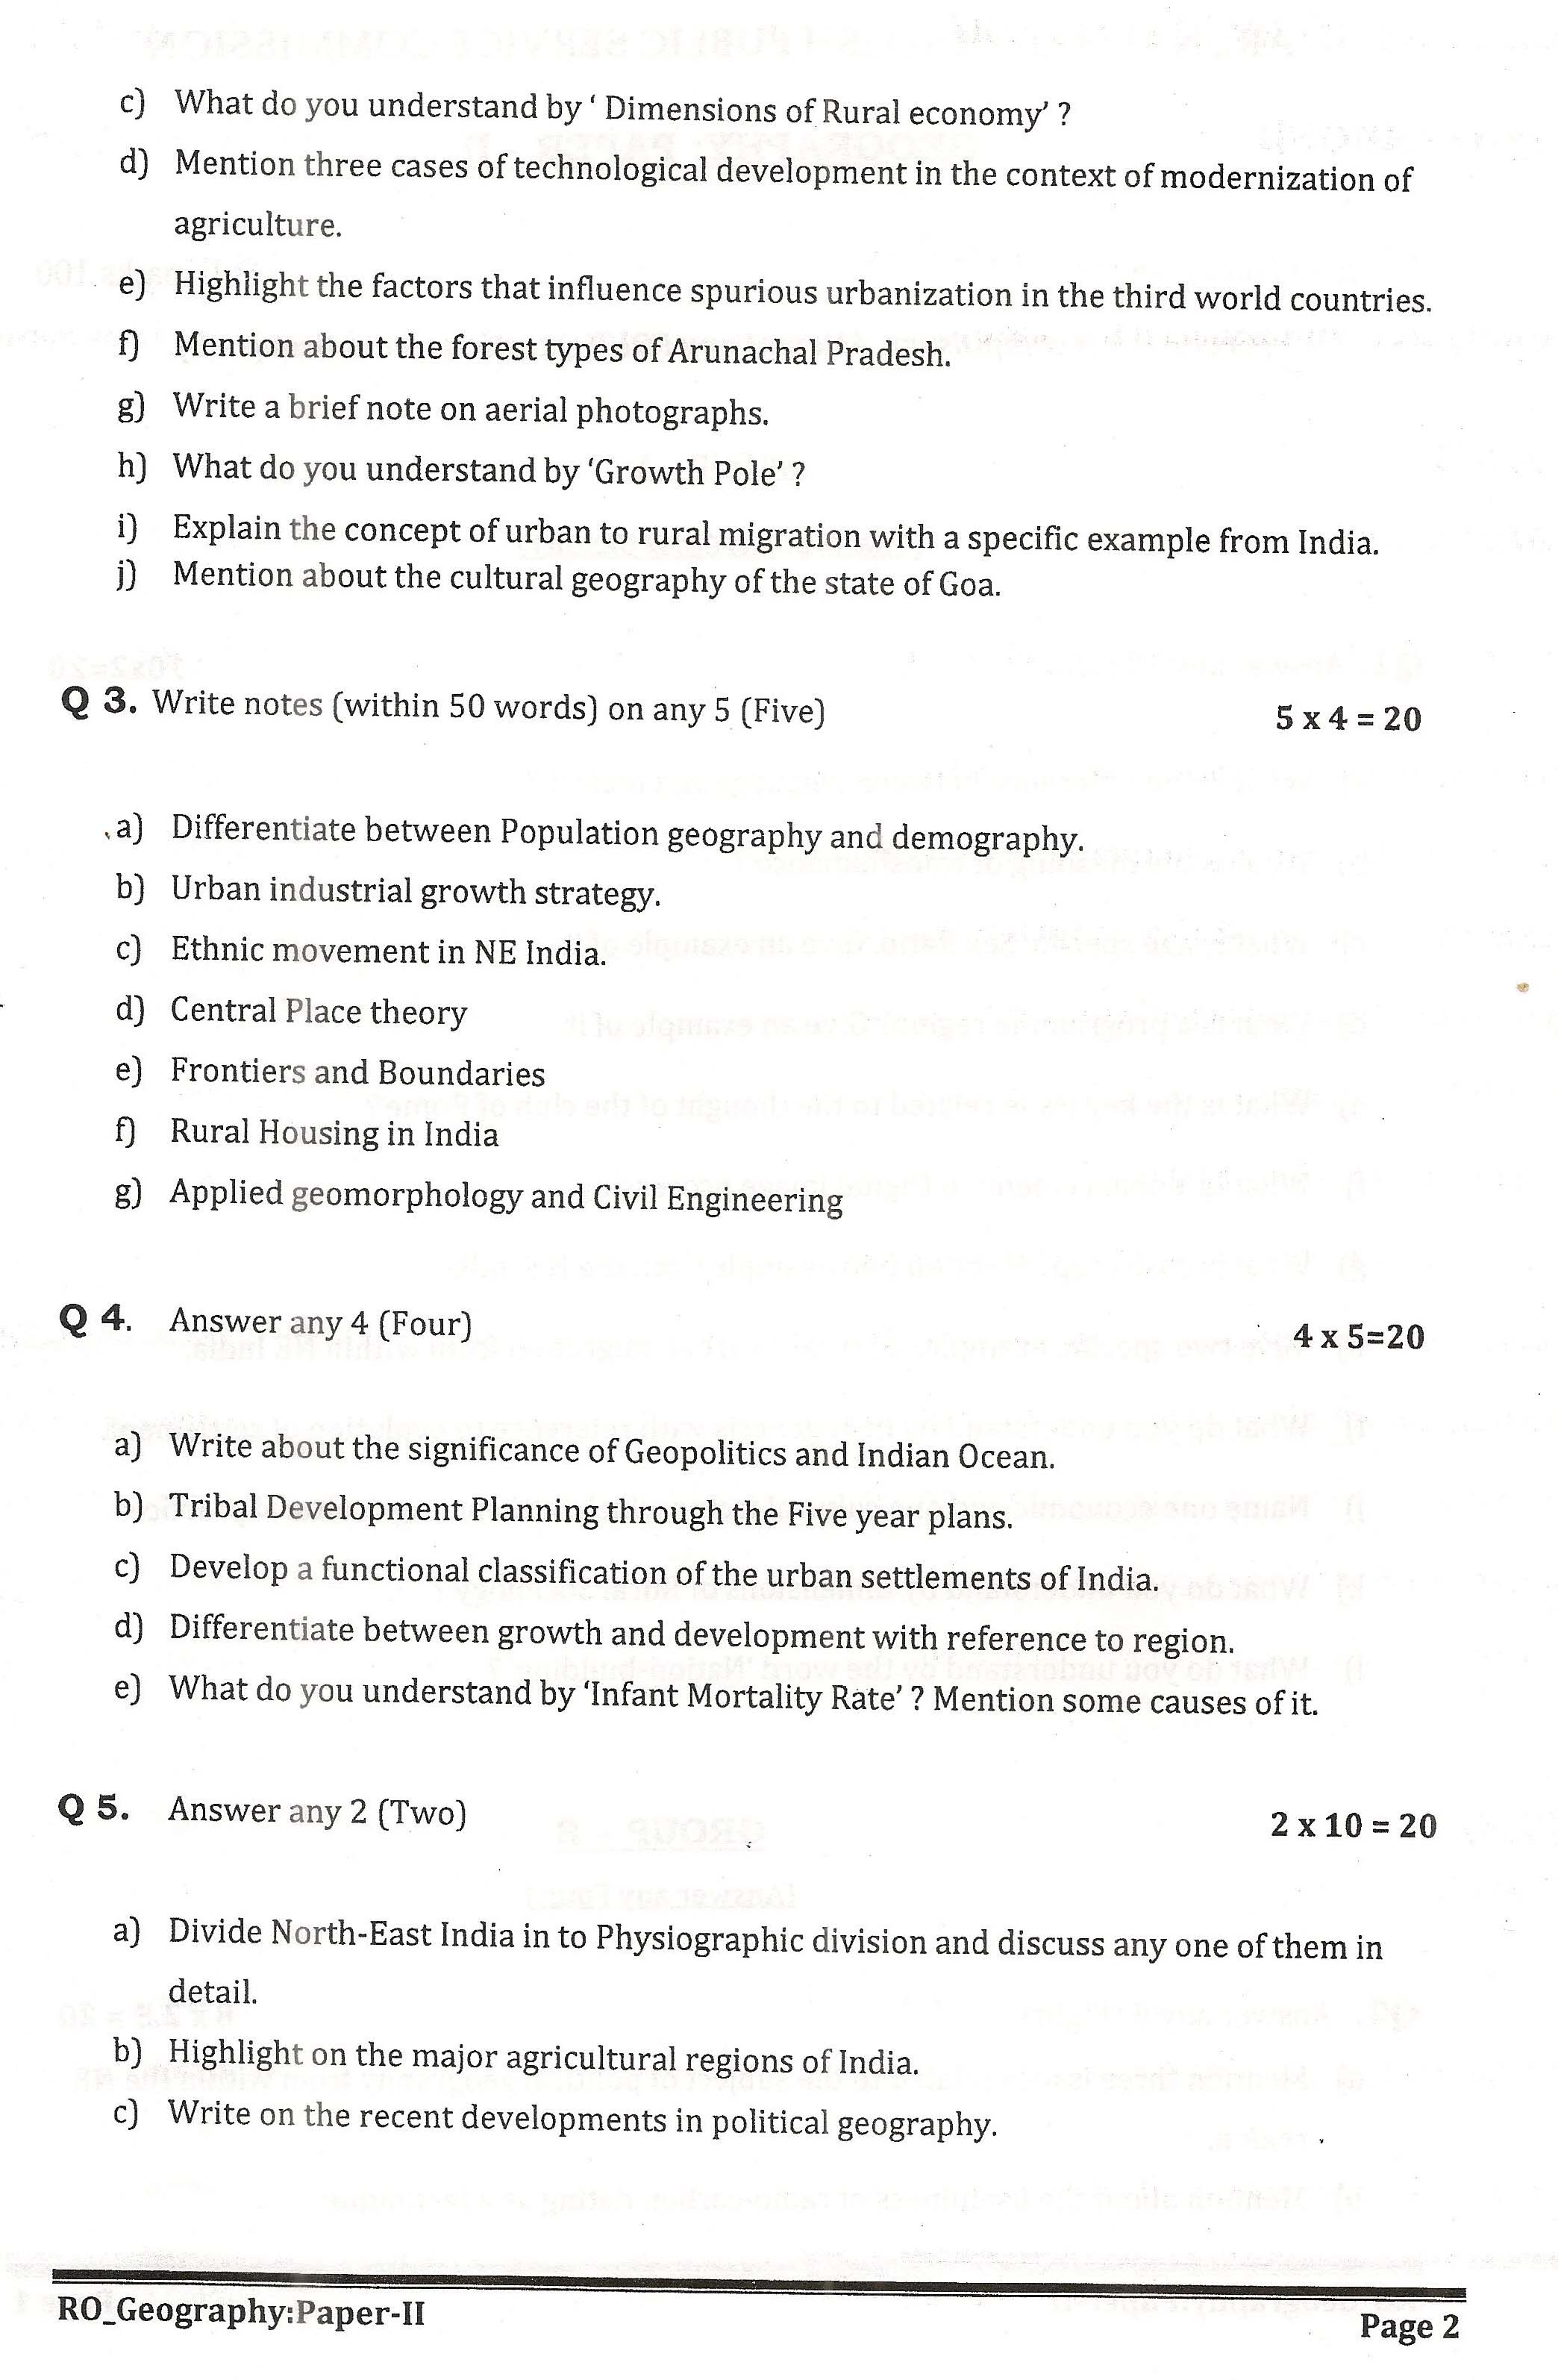 APPSC Research Officer Geography Paper II Exam Question Paper 2014 2